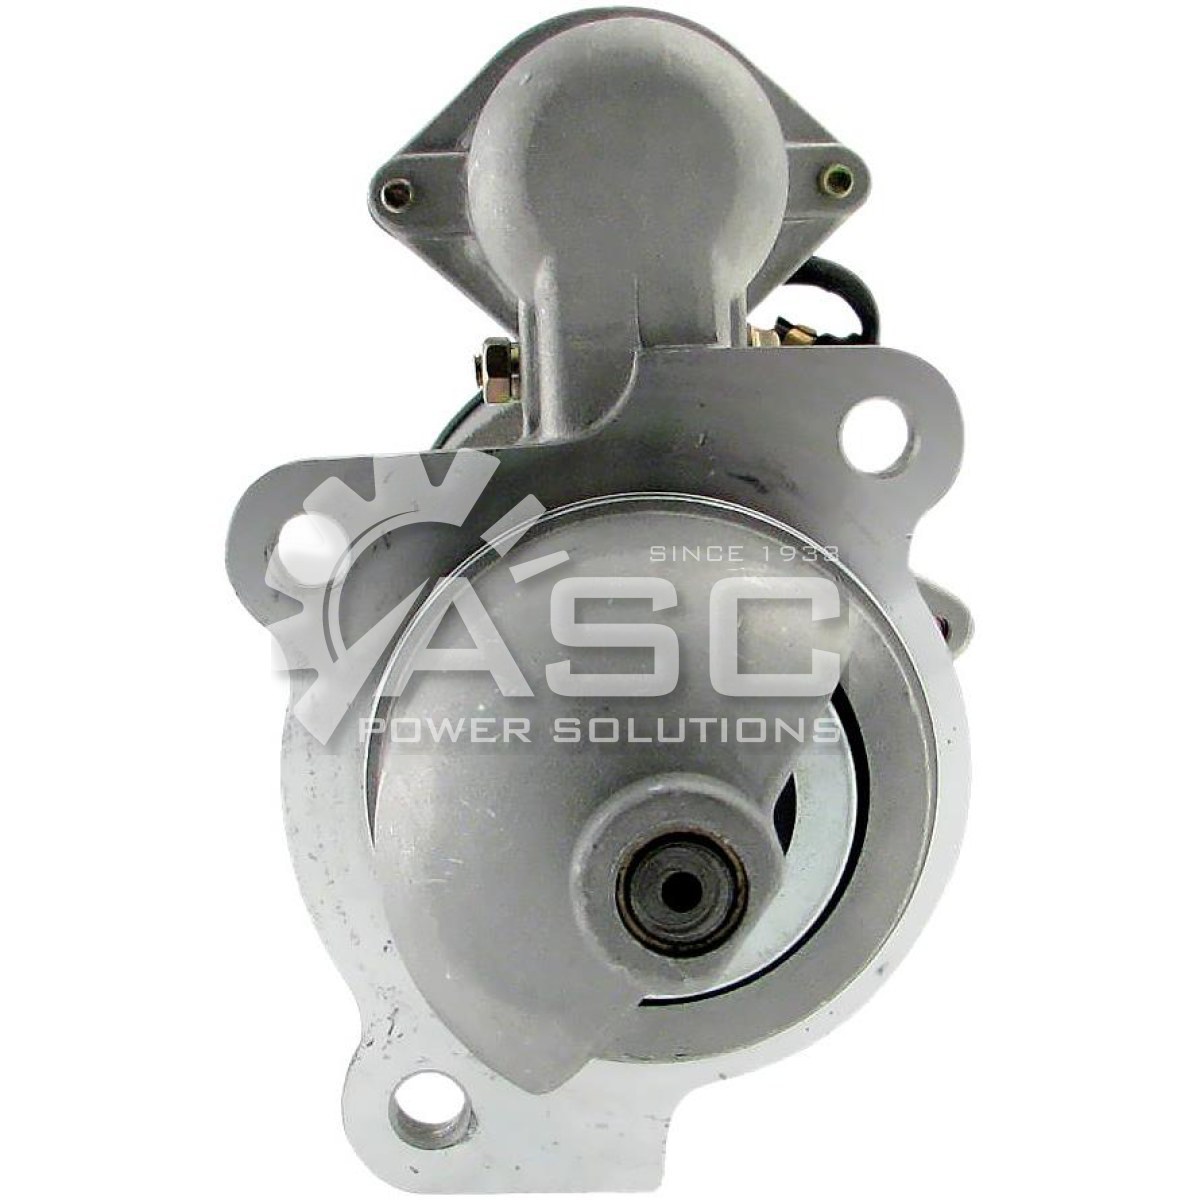 S122096_REMAN ASC POWER SOLUTIONS DELCO STARTER MOTOR FOR FORD AND CUMMINS 12V 10 TOOTH CLOCKWISE ROTATION OFF SET GEAR REDUCTION (OSGR)